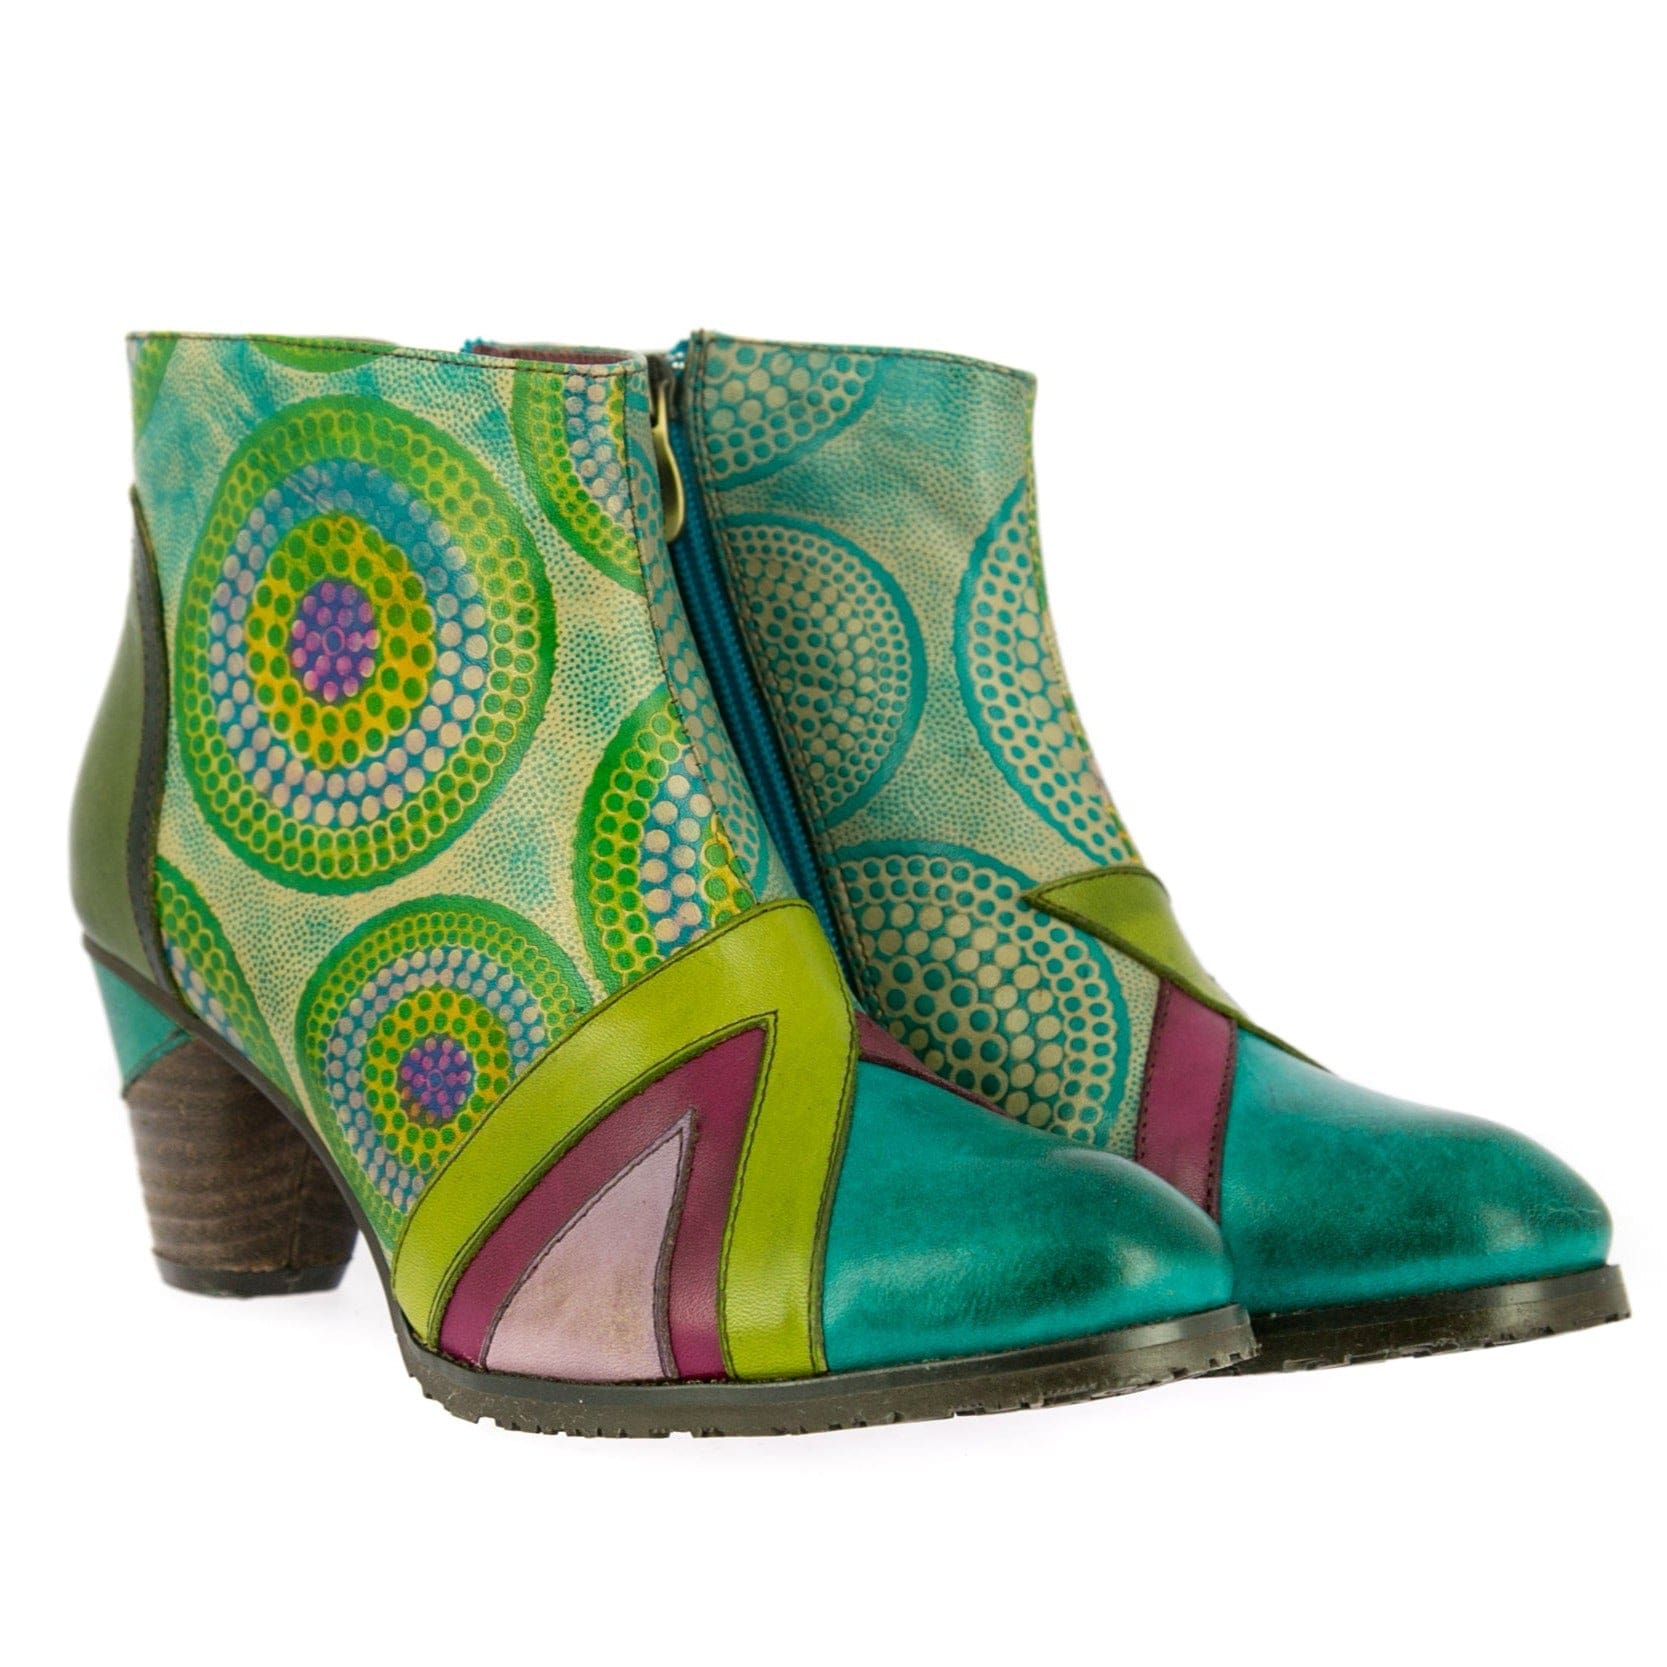 Chaussures CAROLE 28 - 37 / Turquoise - Boots